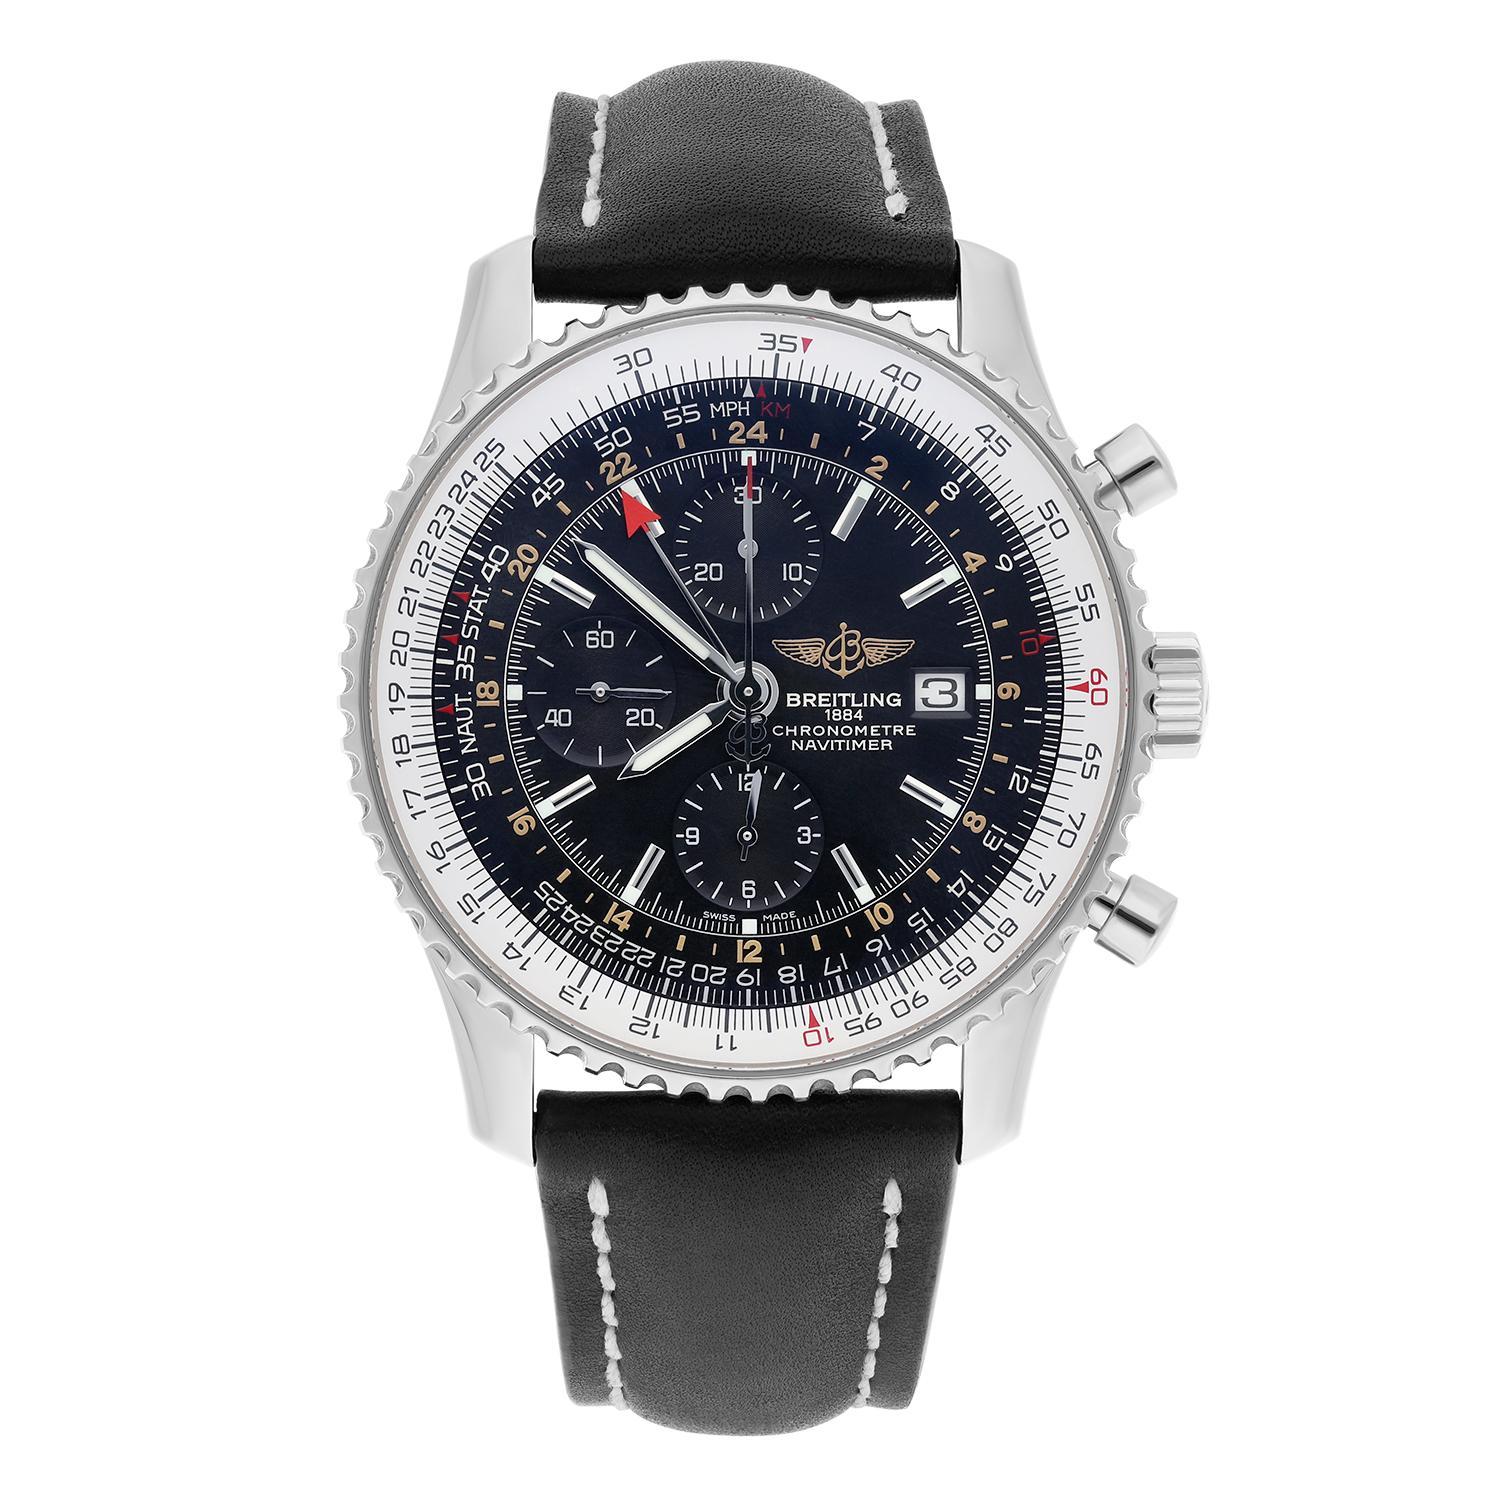 This stunning Breitling Navitimer World watch is the perfect addition to any collection. Its sleek silver case color and black dial color create a beautiful contrast that catches the eye. With a two-piece strap this watch fits comfortably on any